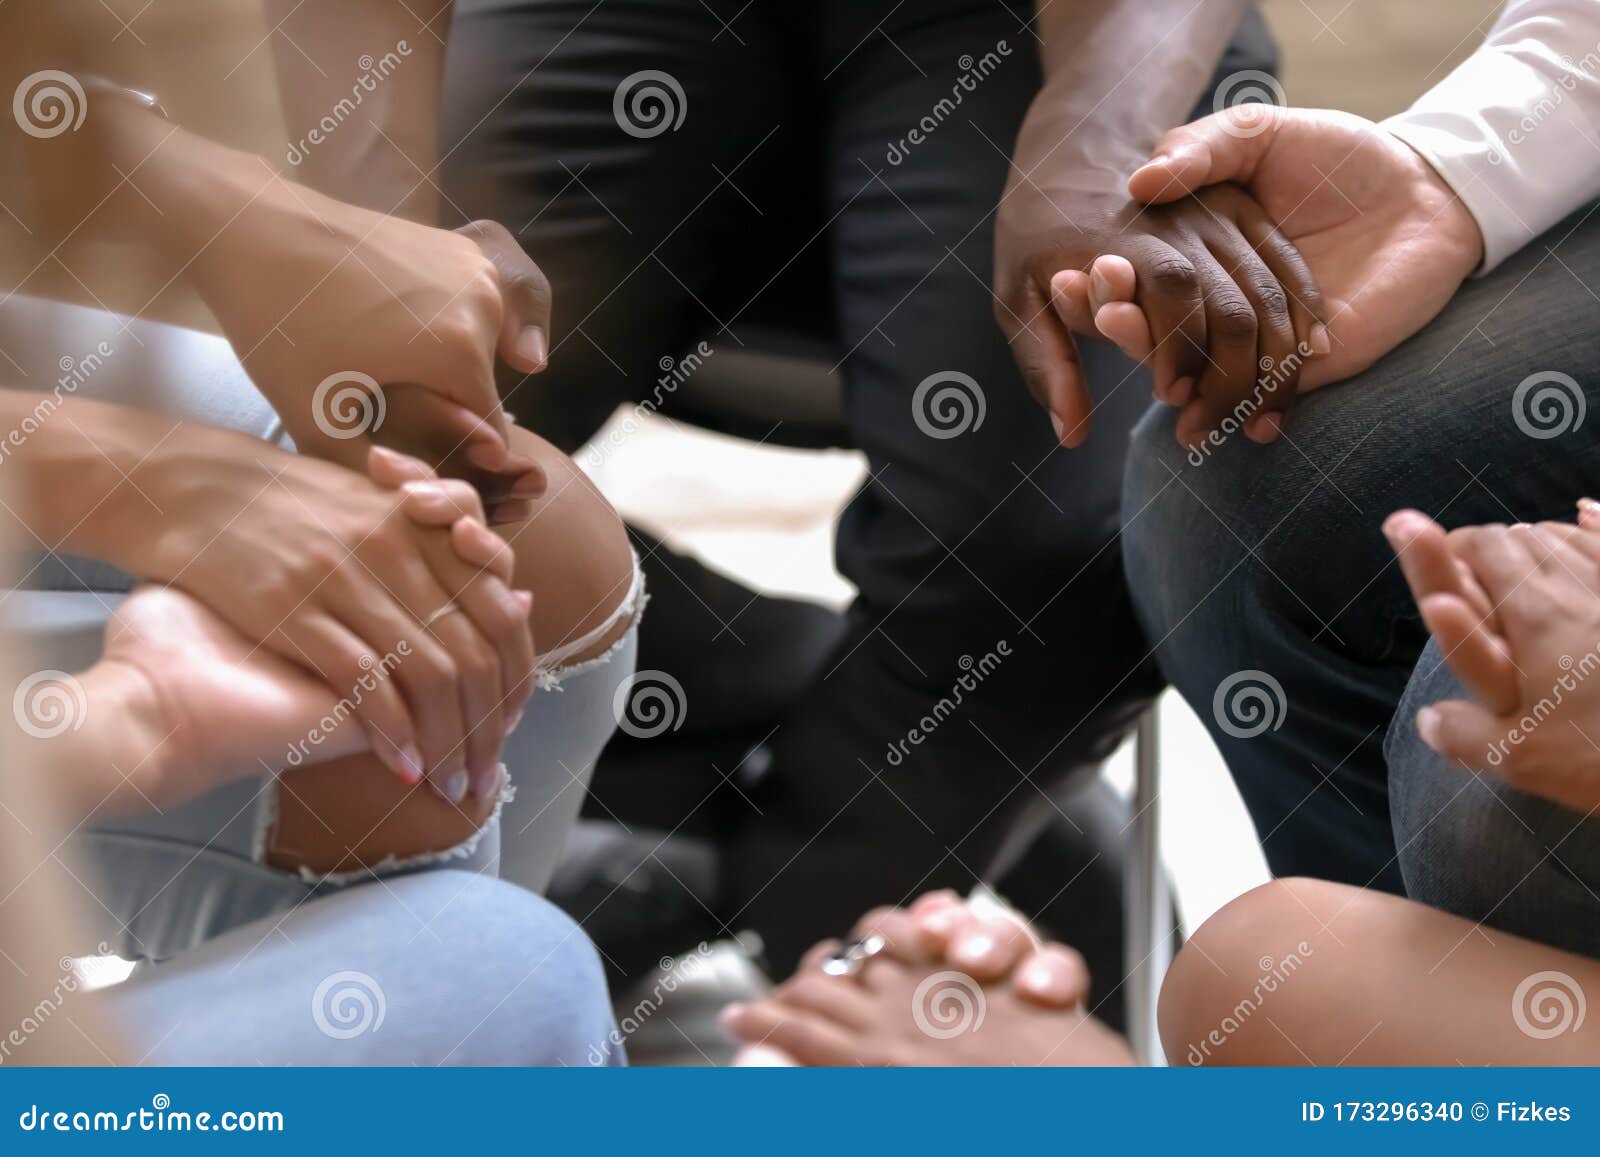 close up diverse people sitting in circle, holding hands